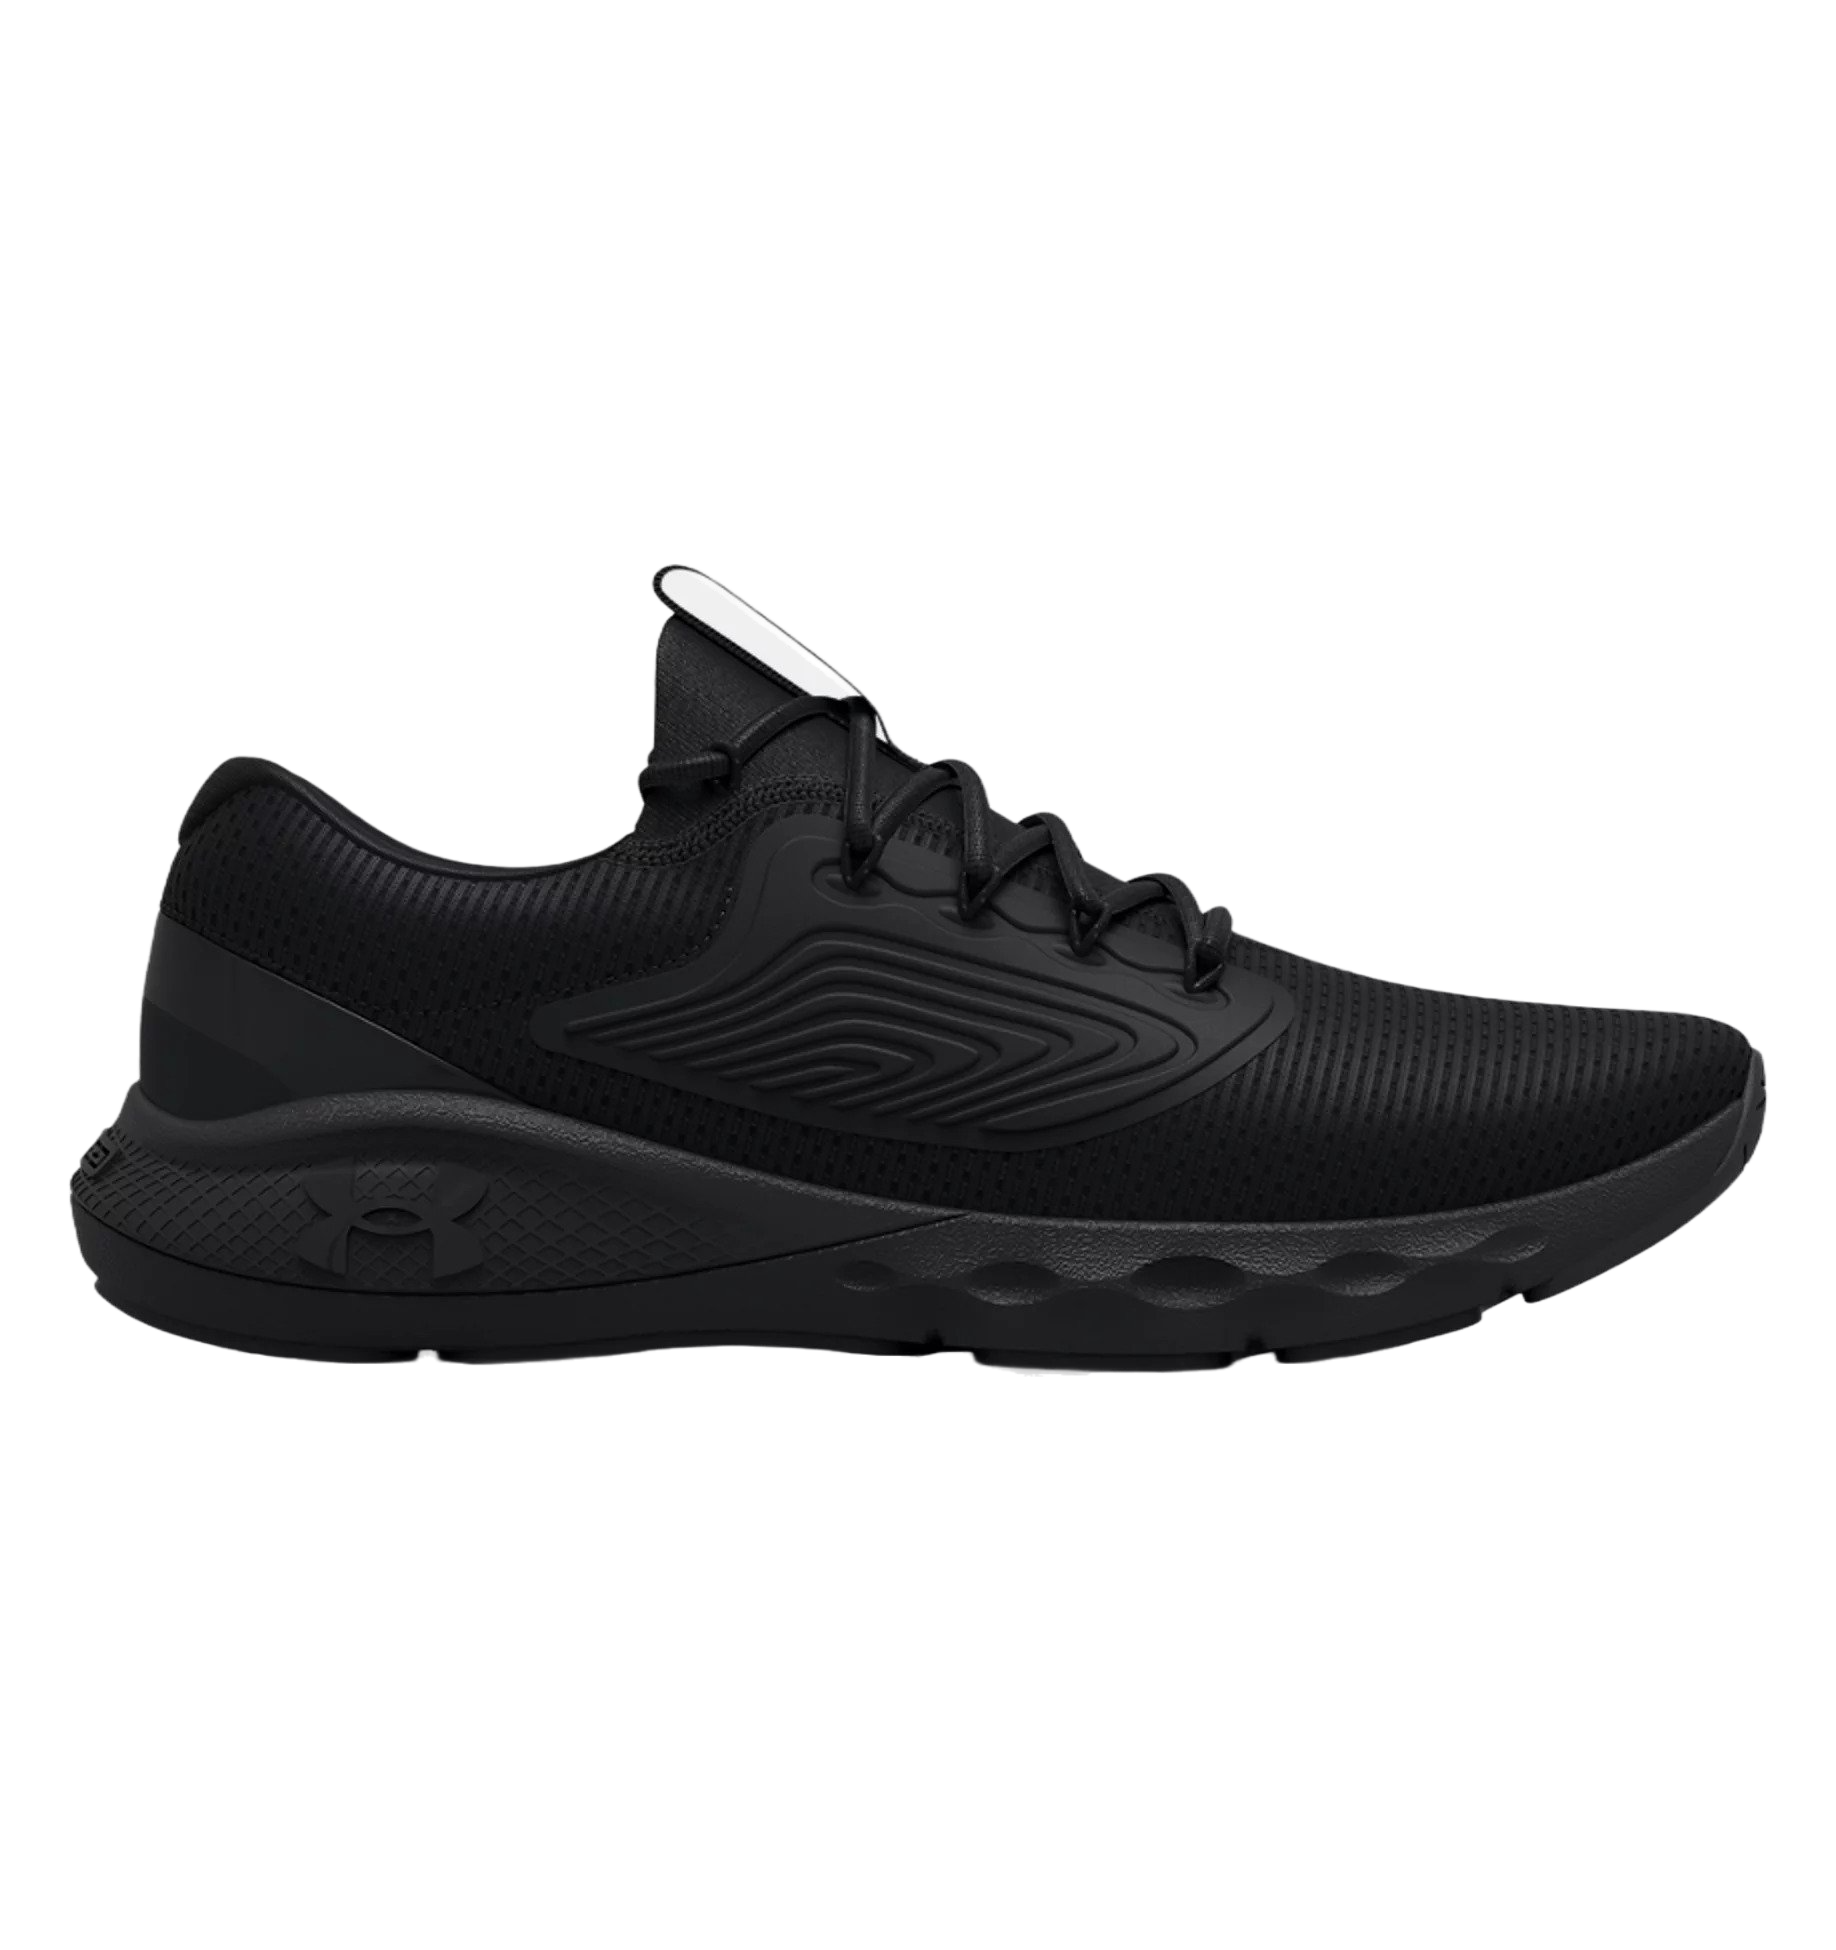 Under Armour Charged Vantage 2 - Mens